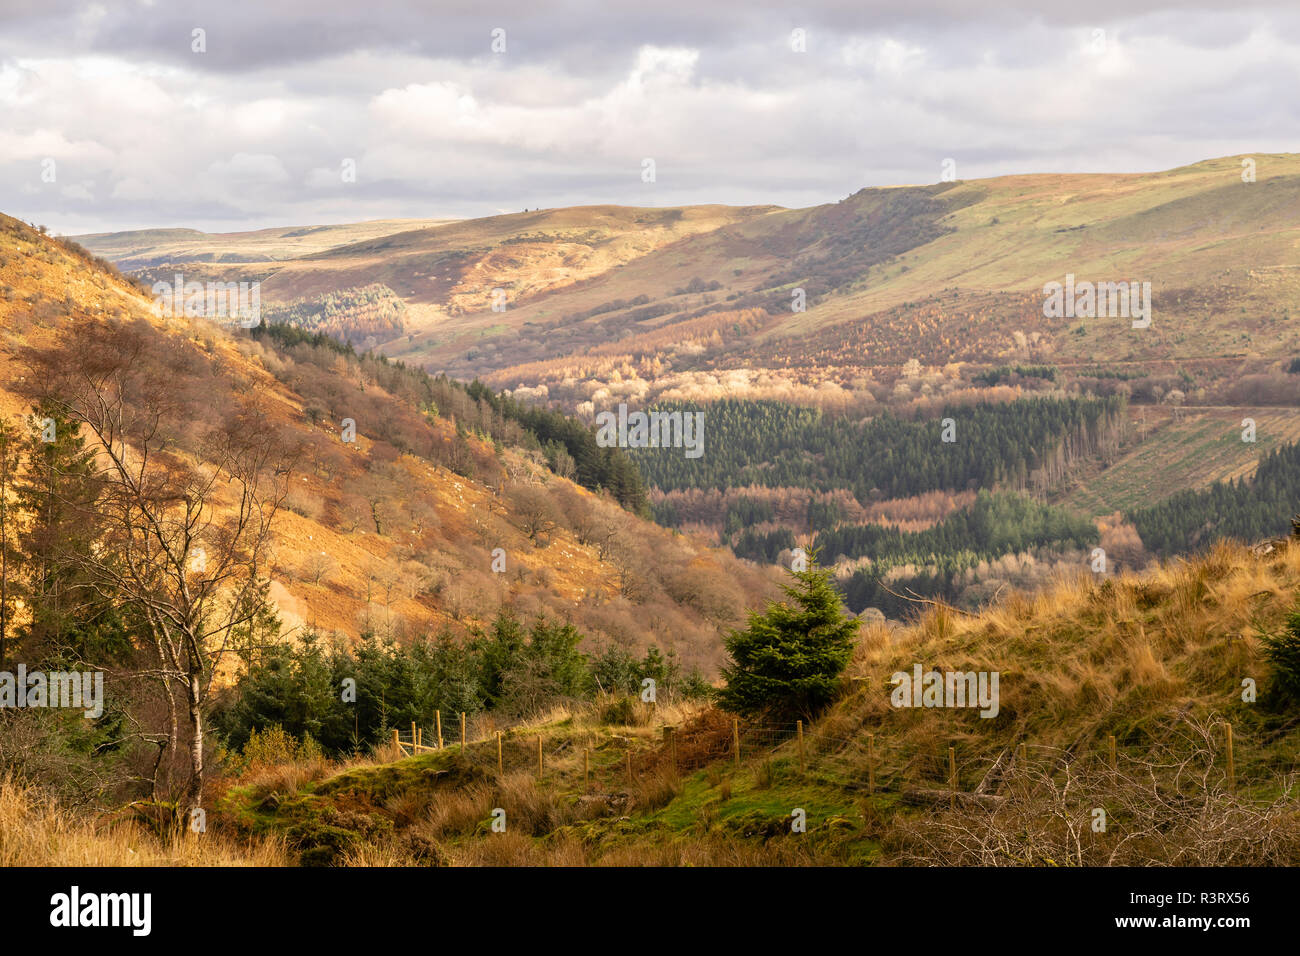 The mountainous landscape around Abercynafon in the Brecon Beacons National Park during autumn, Powys, Wales, UK Stock Photo